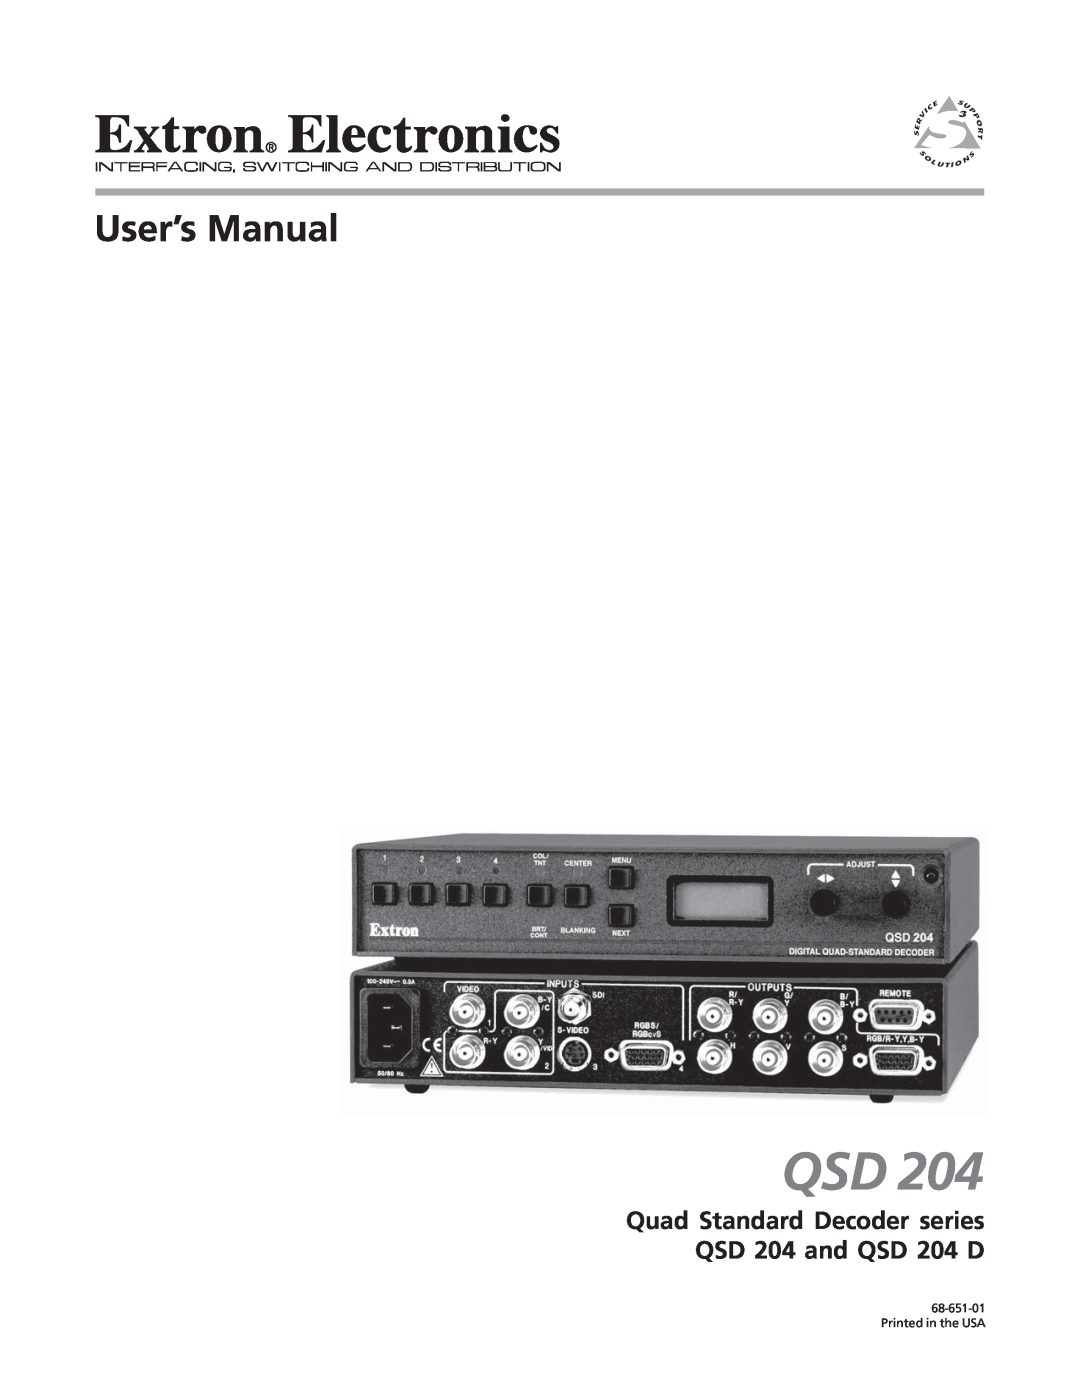 Extron electronic manual Quad Standard Decoder series QSD 204 and QSD 204 D, Printed in the USA 